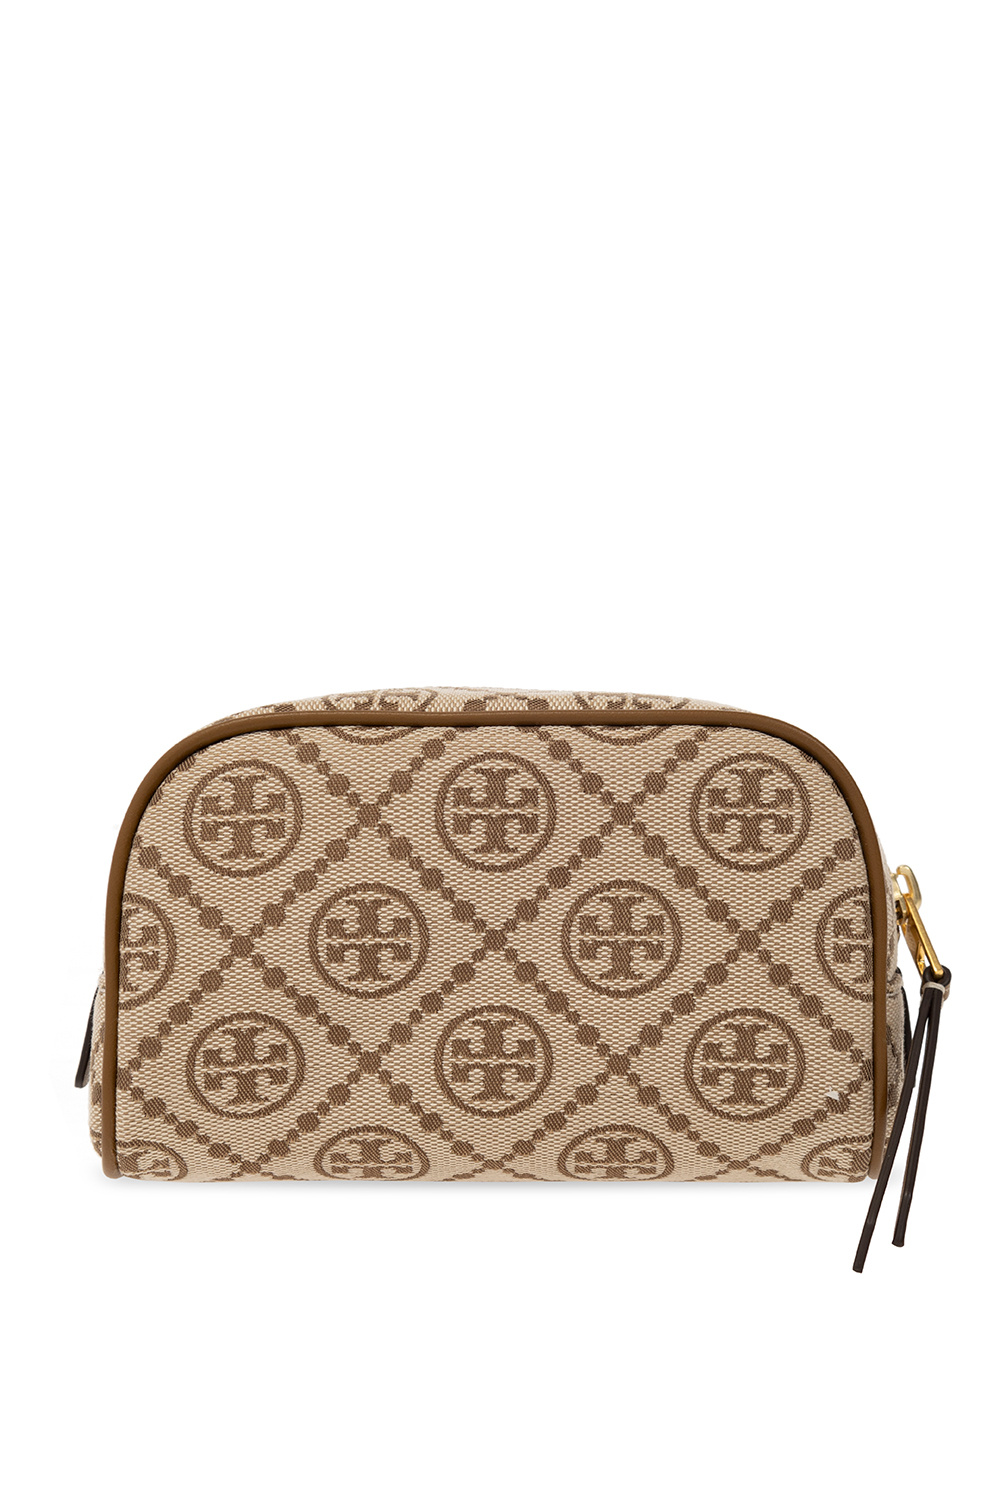 the ® Marilyn Medium Top Zip Tote will be an instant fave - IetpShops  Norway - Wash bag with monogram Tory Burch